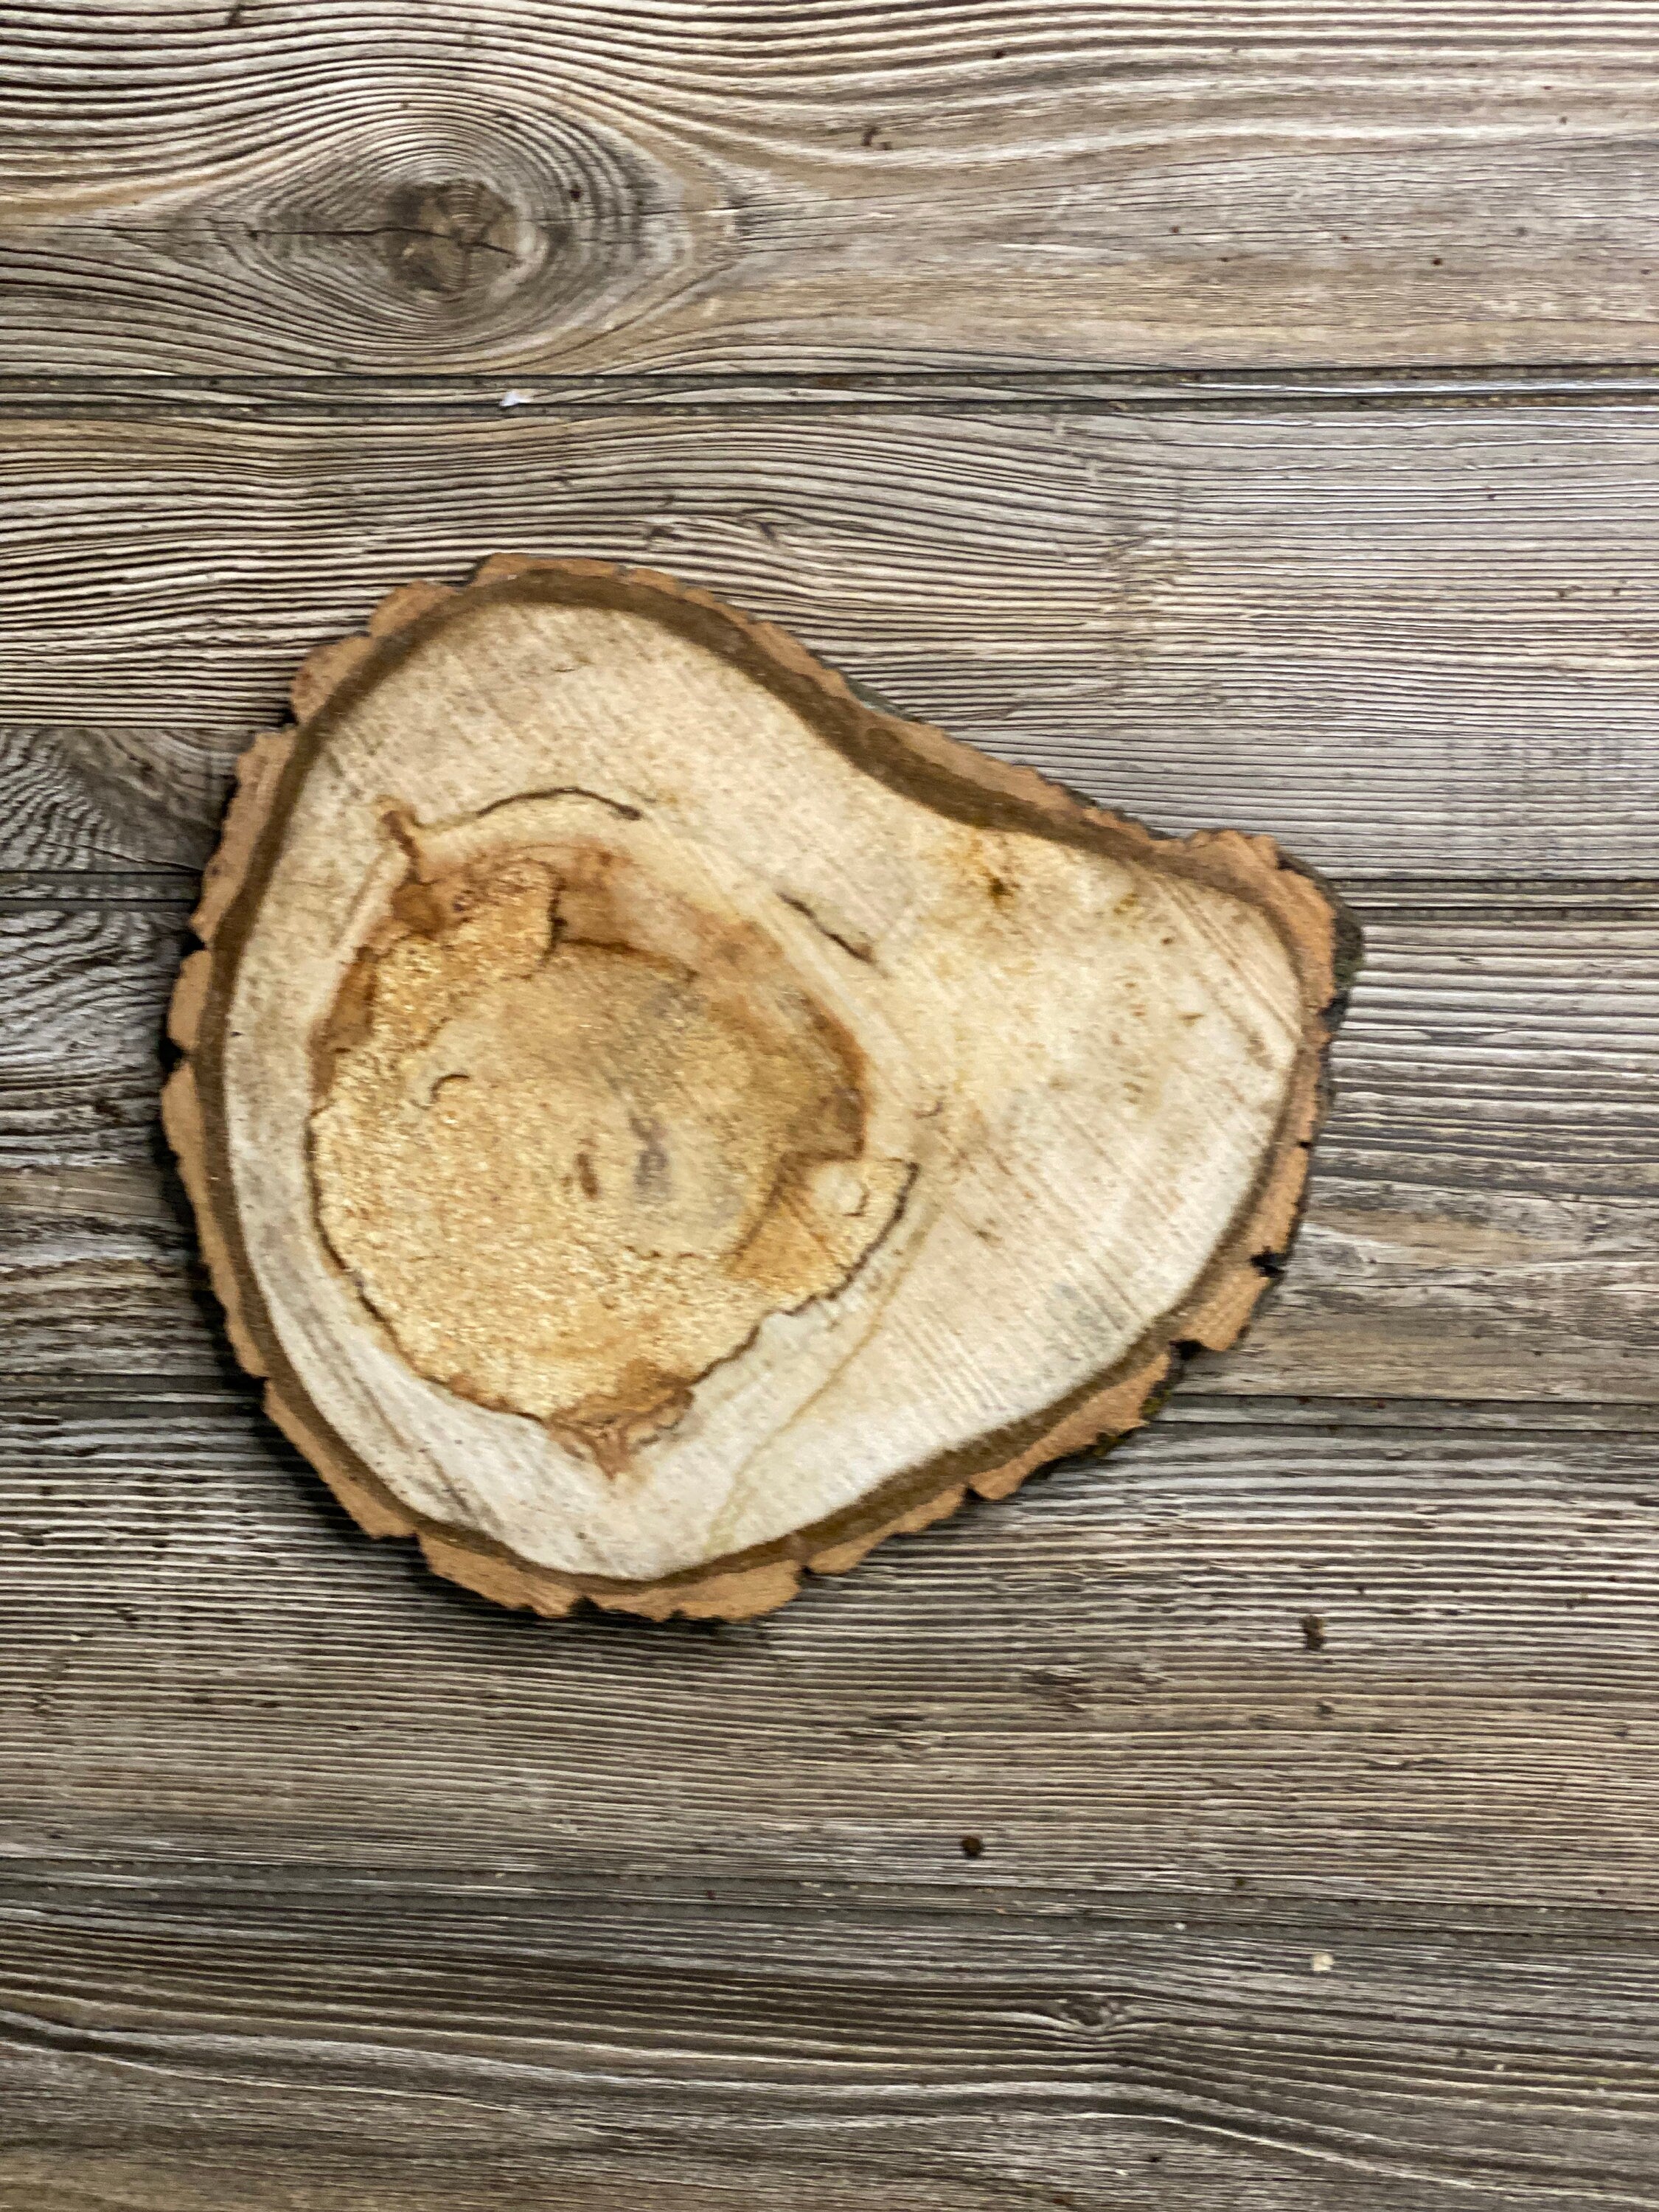 Aspen Burl Slice, Approximately 9 Inches Long by 8 Inches Wide and 1 Inch Thick